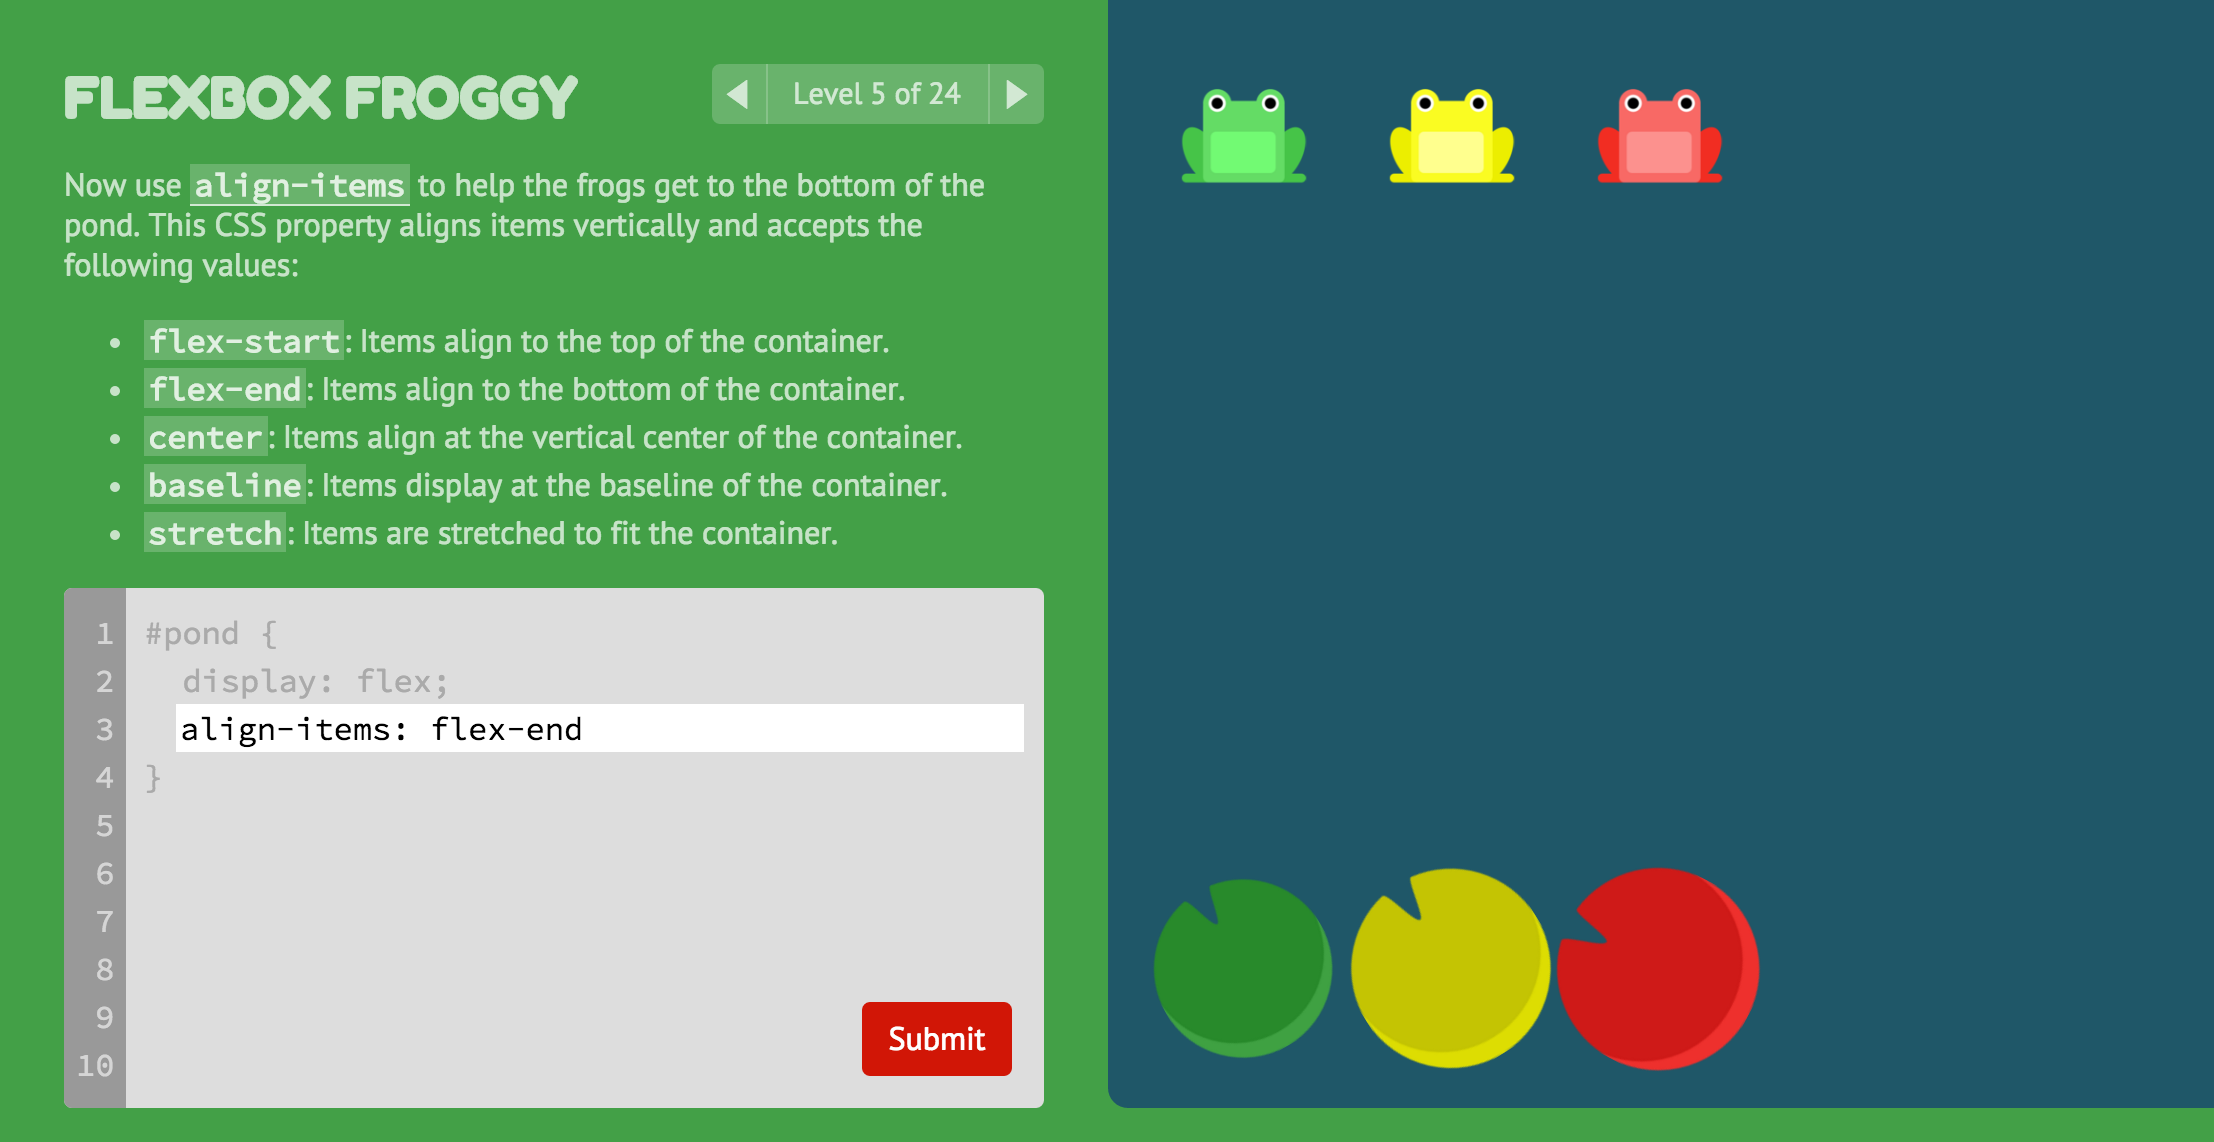 Flexbox Froggy - A game for learning CSS flexbox